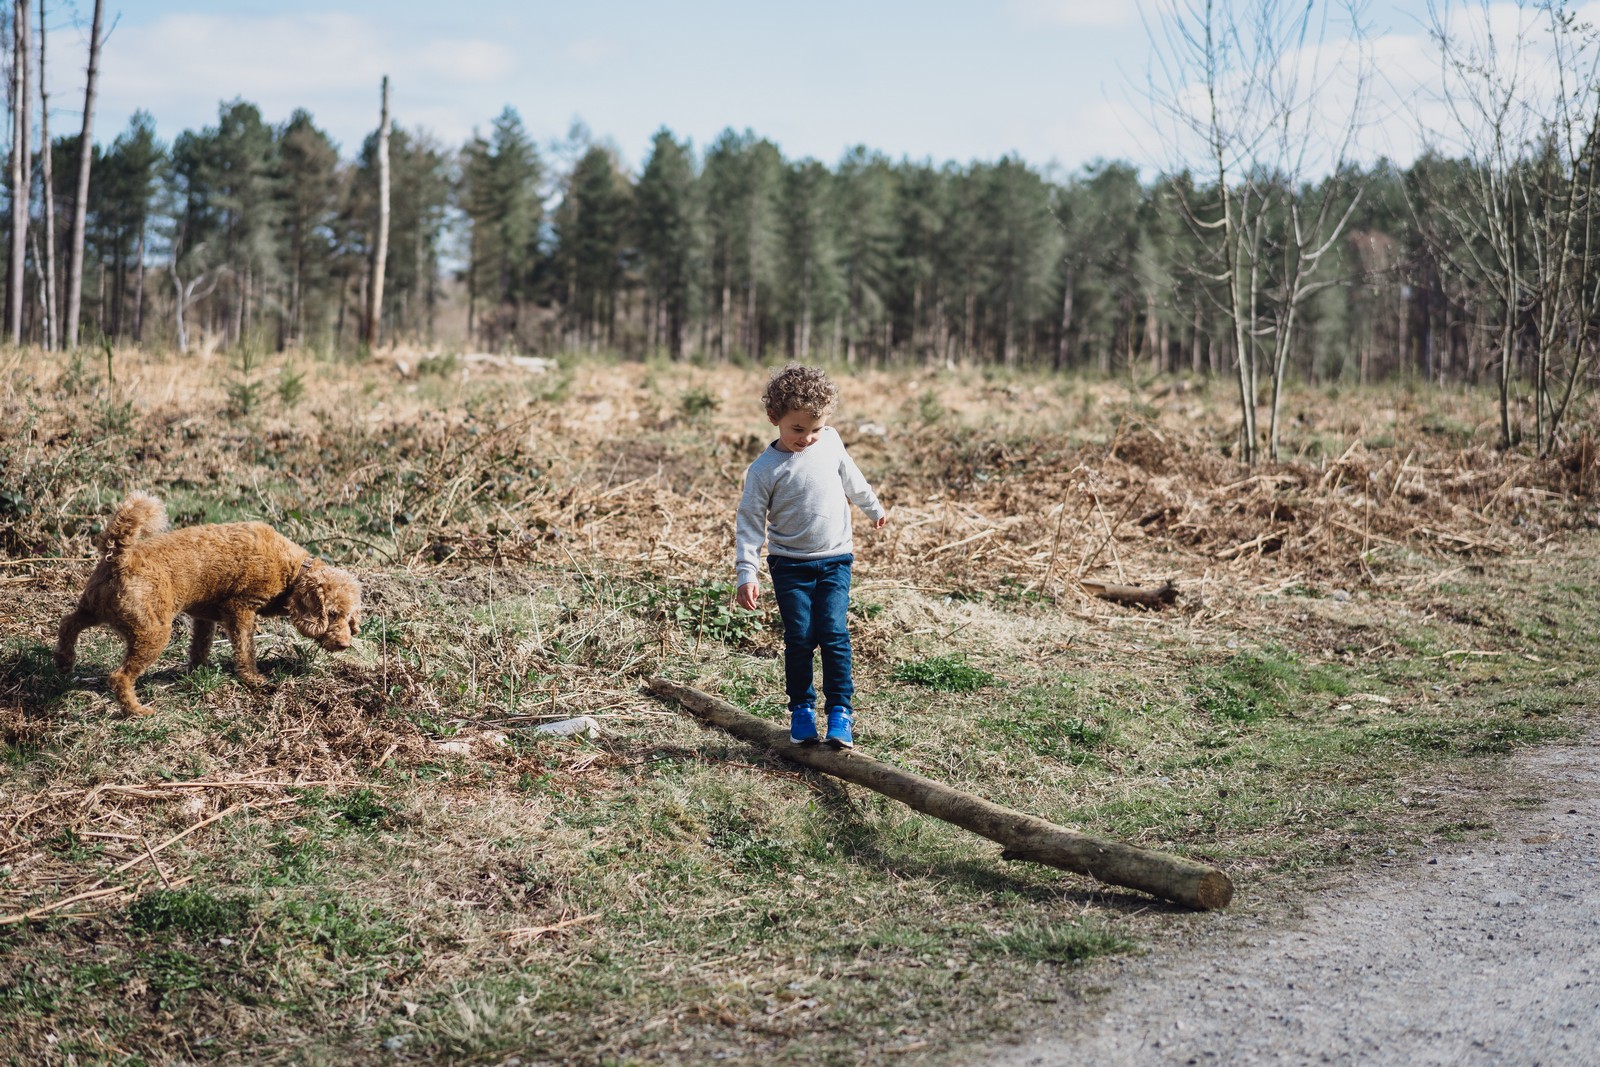 Forest shoot // Oliver and his dog Hugo